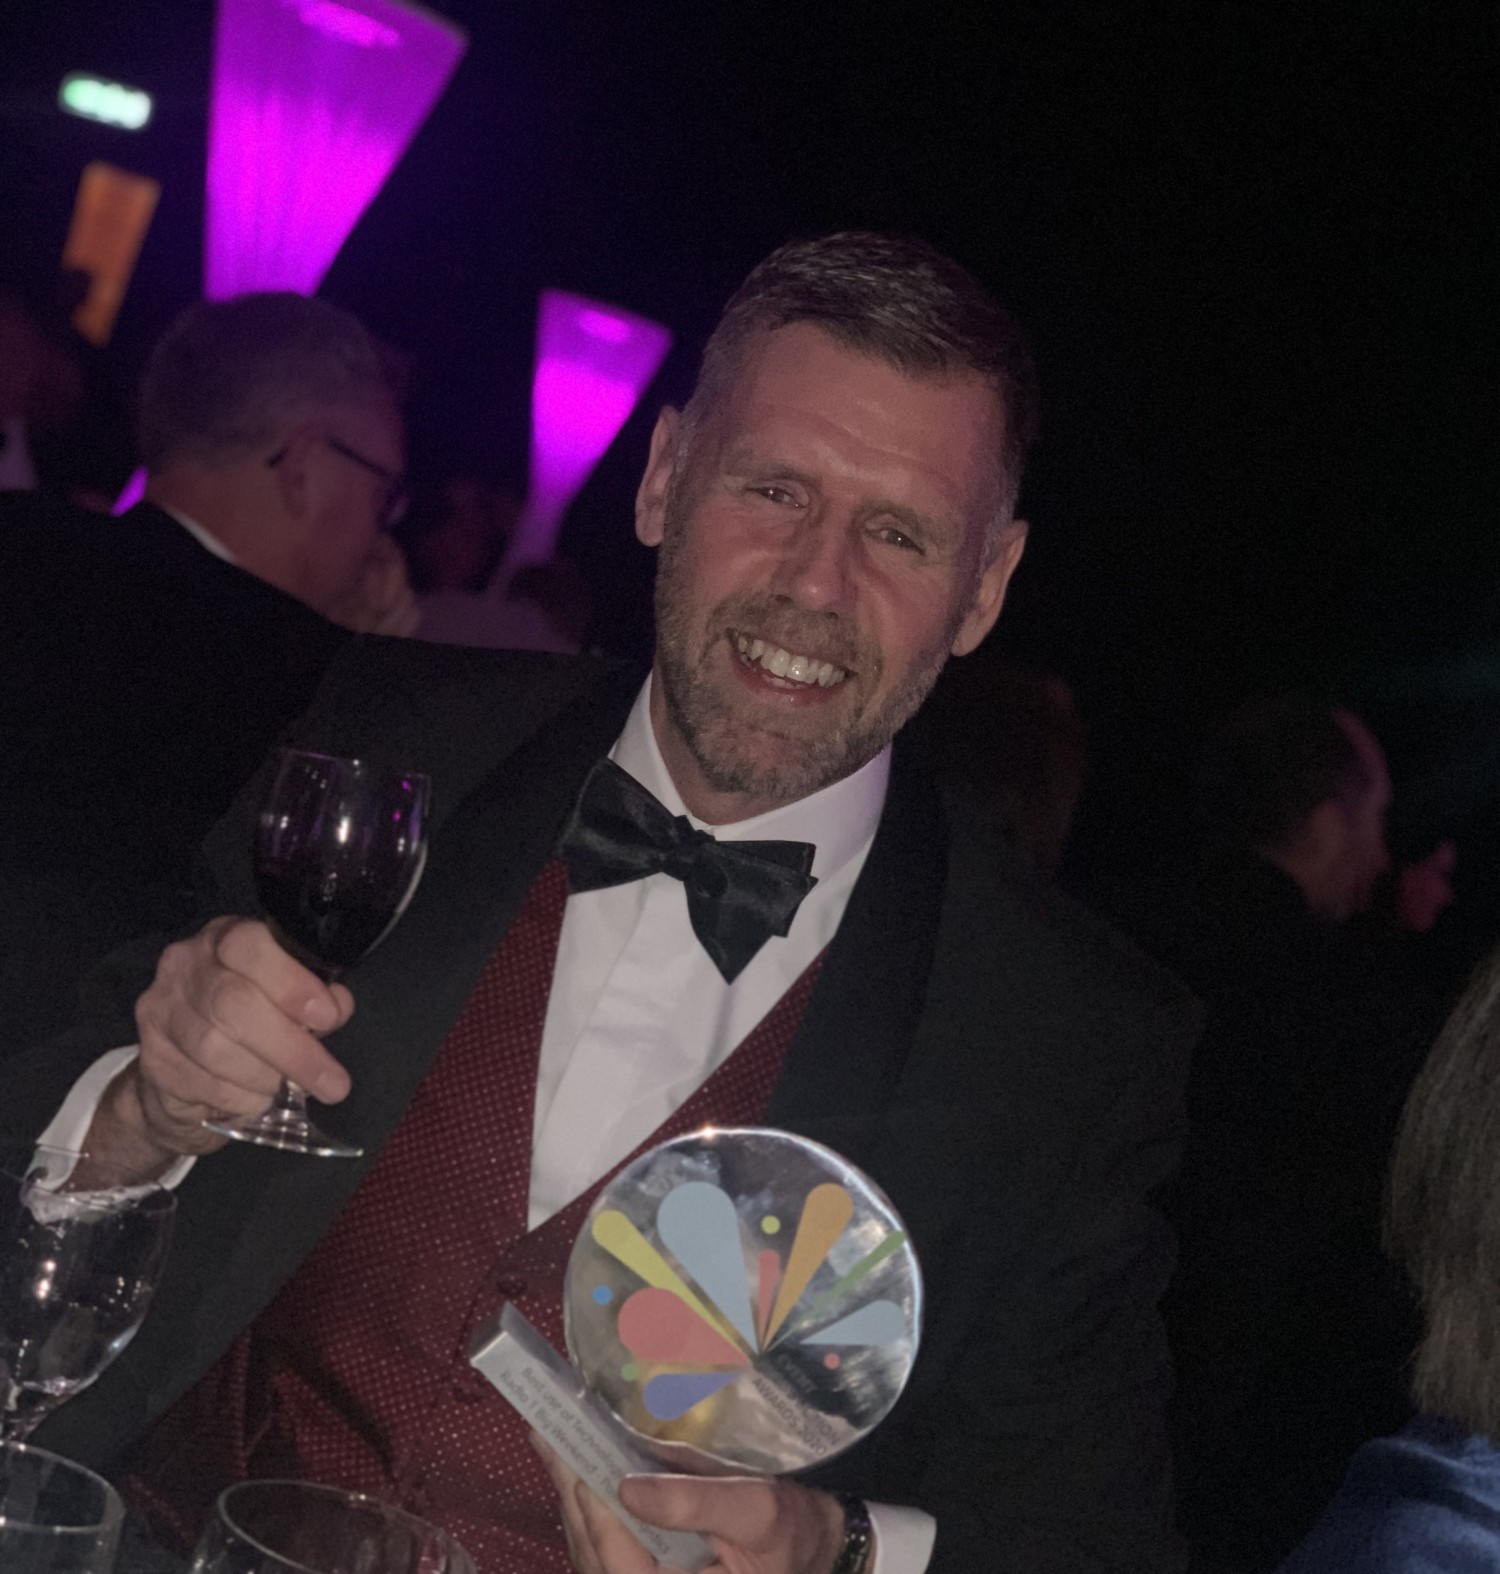 Mike Whitehouse receives Event Production Award 2020